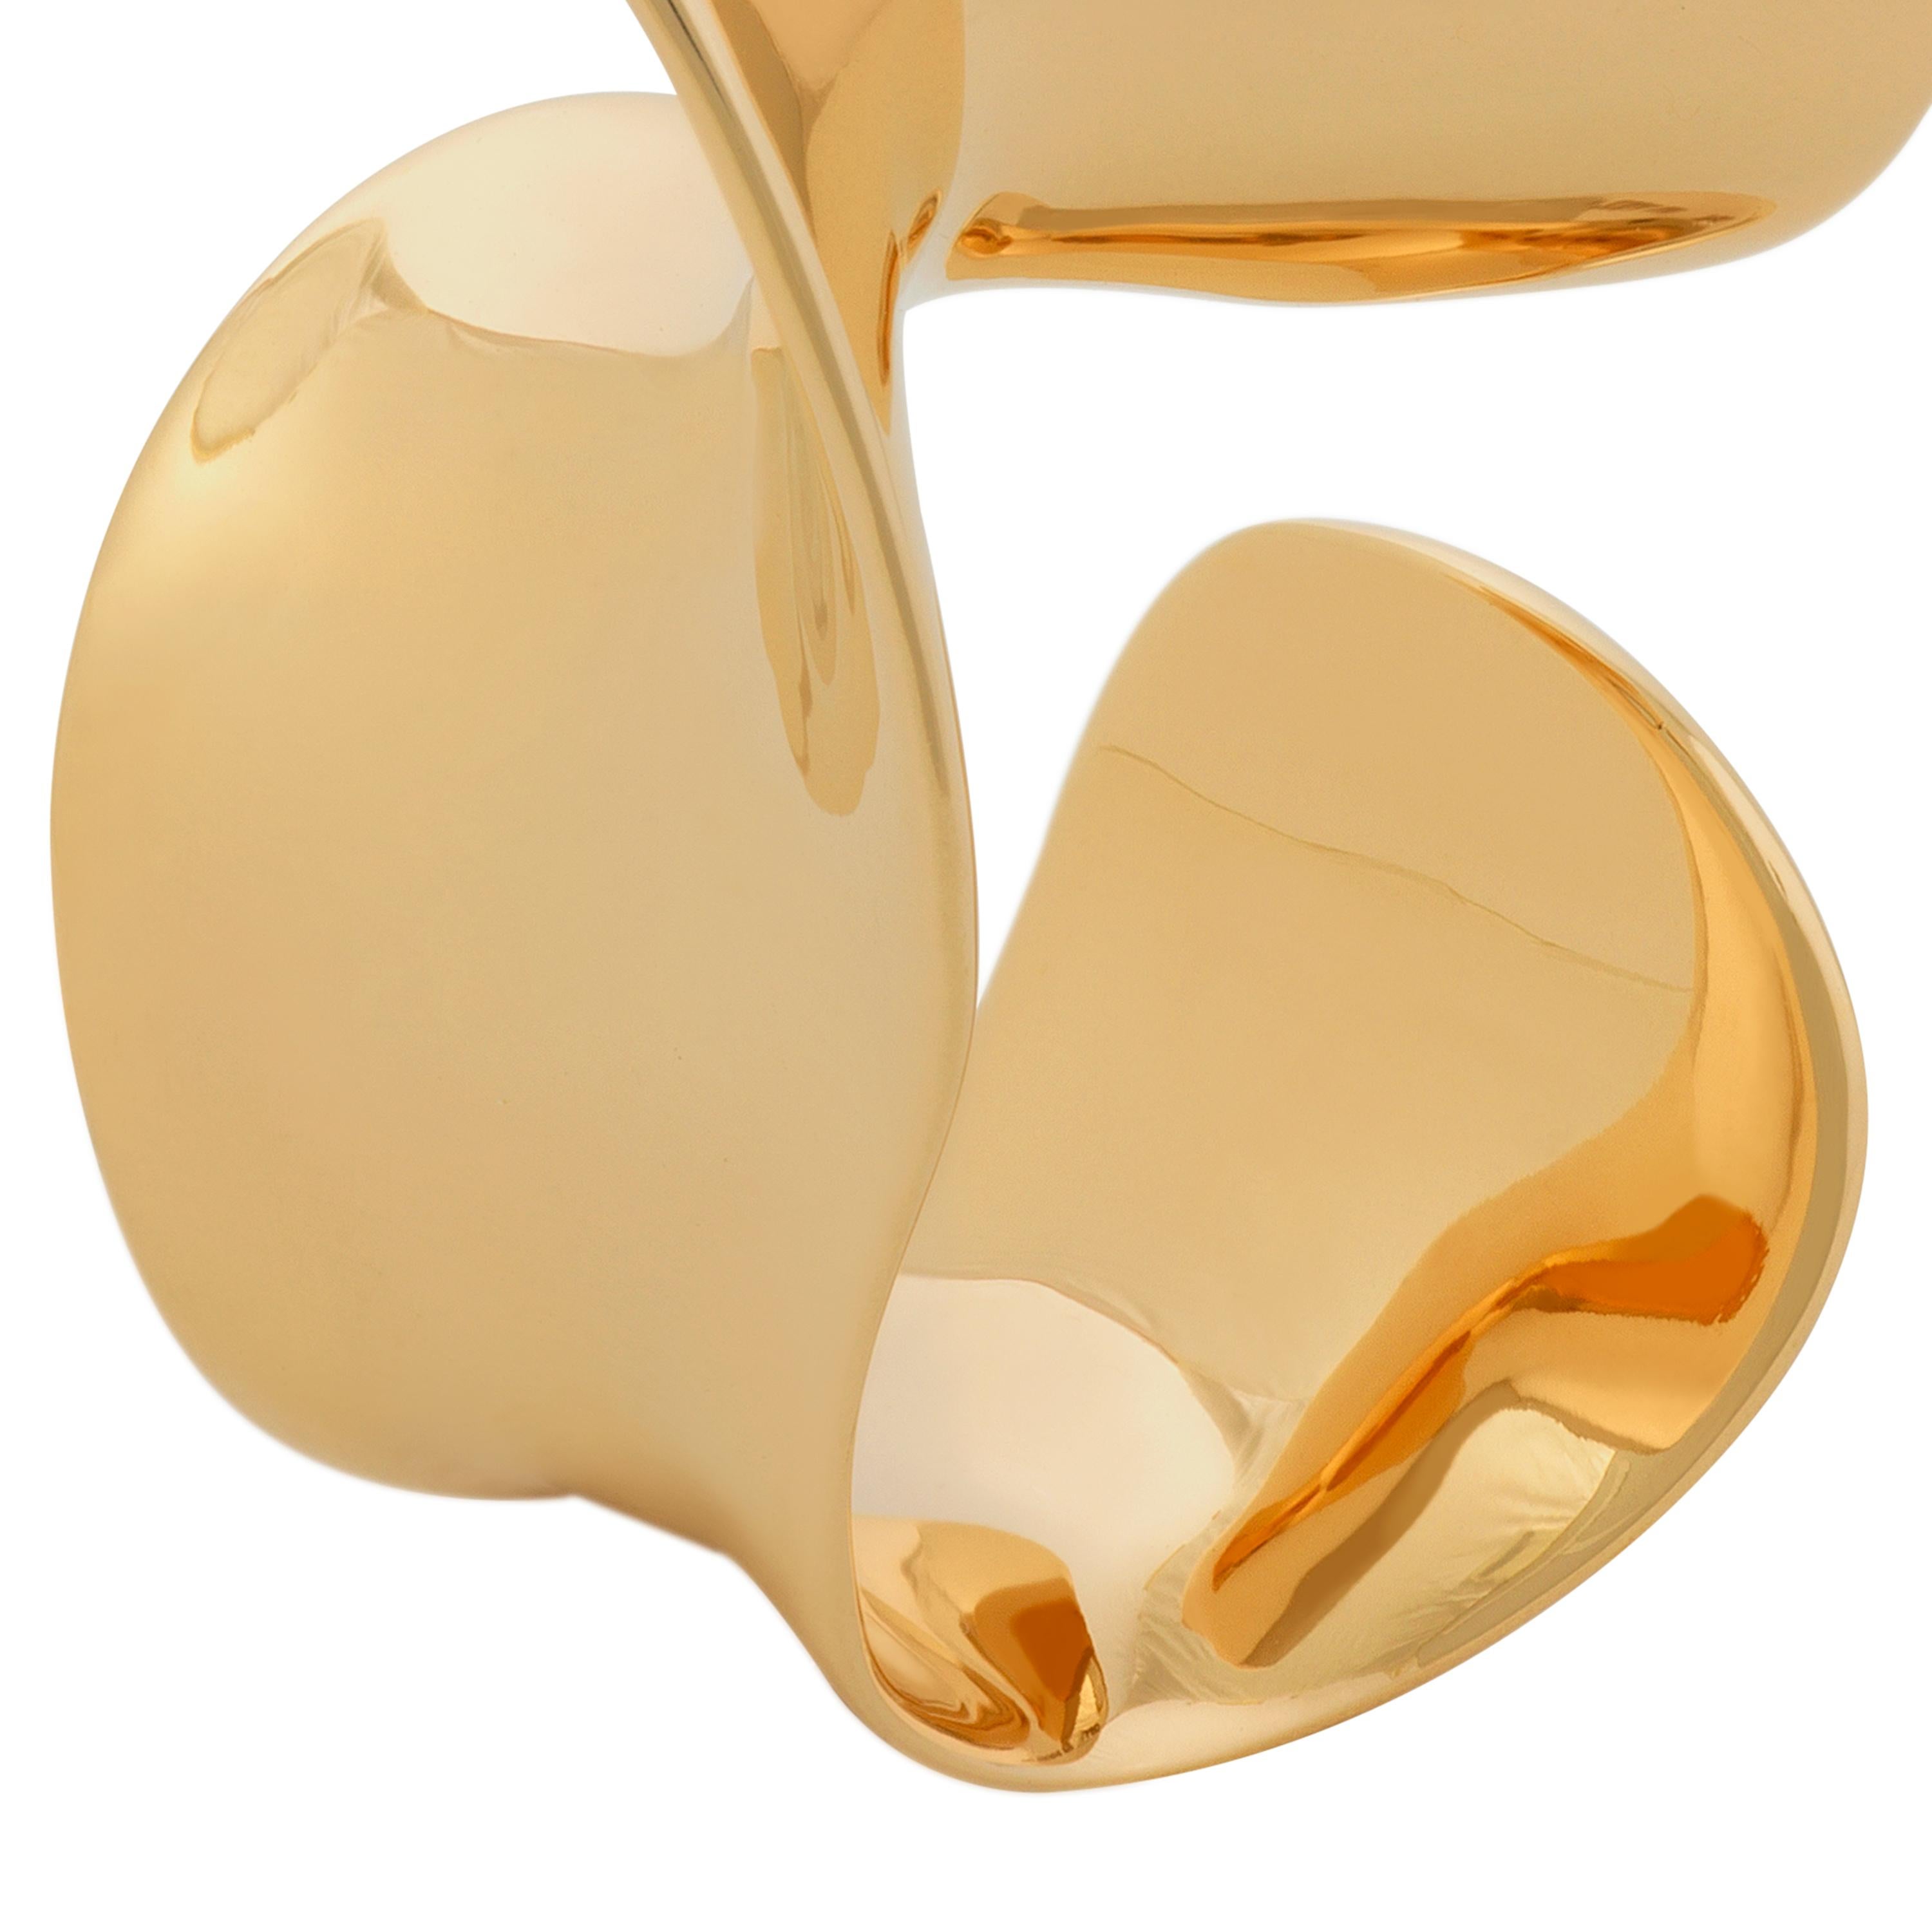 Nathalie Jean Contemporary Limited Edition 18 Karat Gold Sculpture Cocktail Ring 1